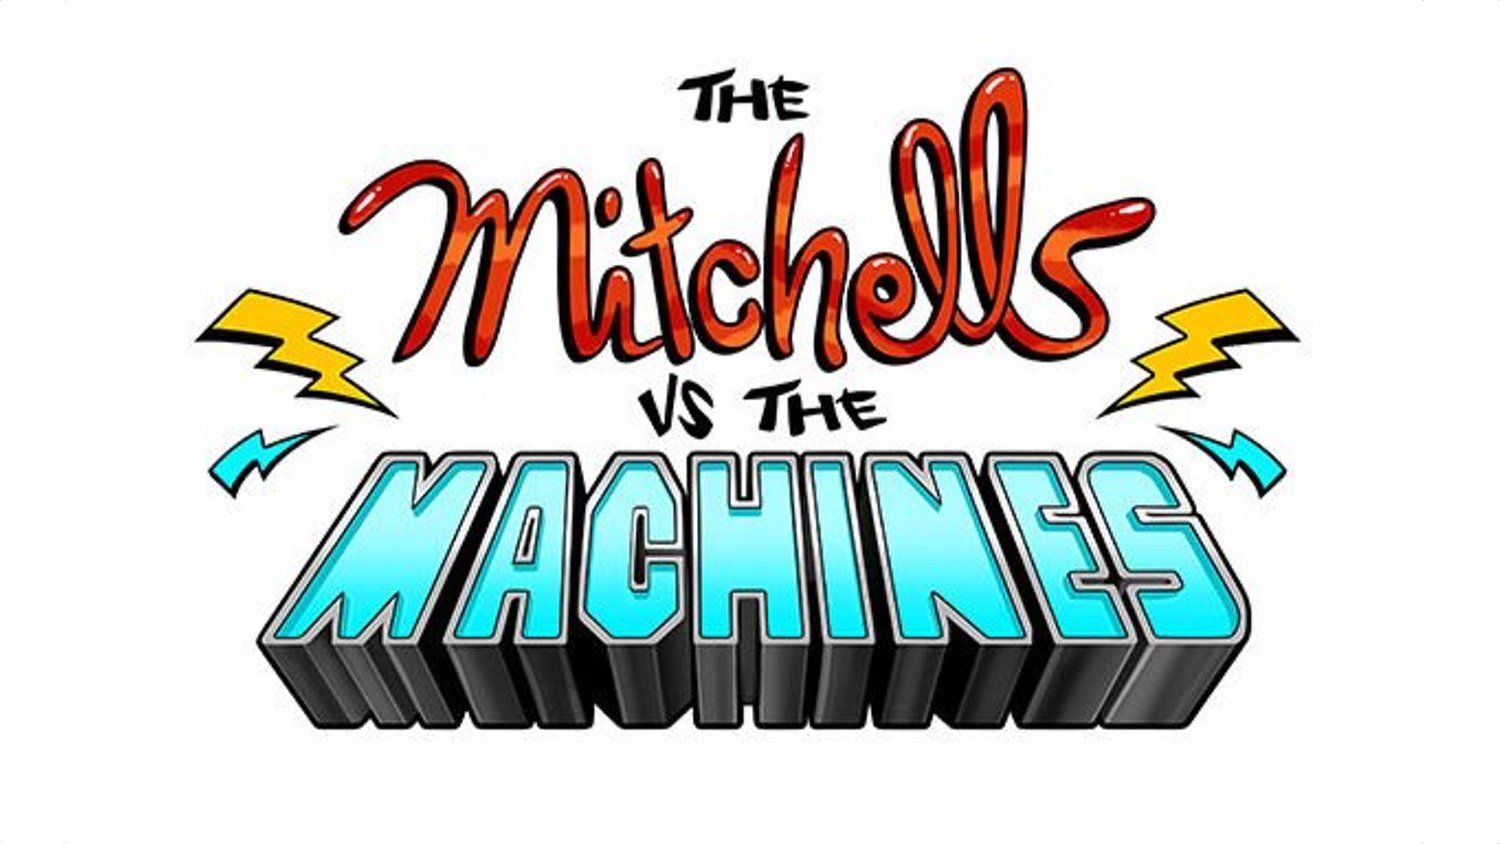 Phil Lord And Chris Miller Producing An Artificial Intelligence Gone Wild Animated Film THE MITCHELLS VS. THE MACHINES